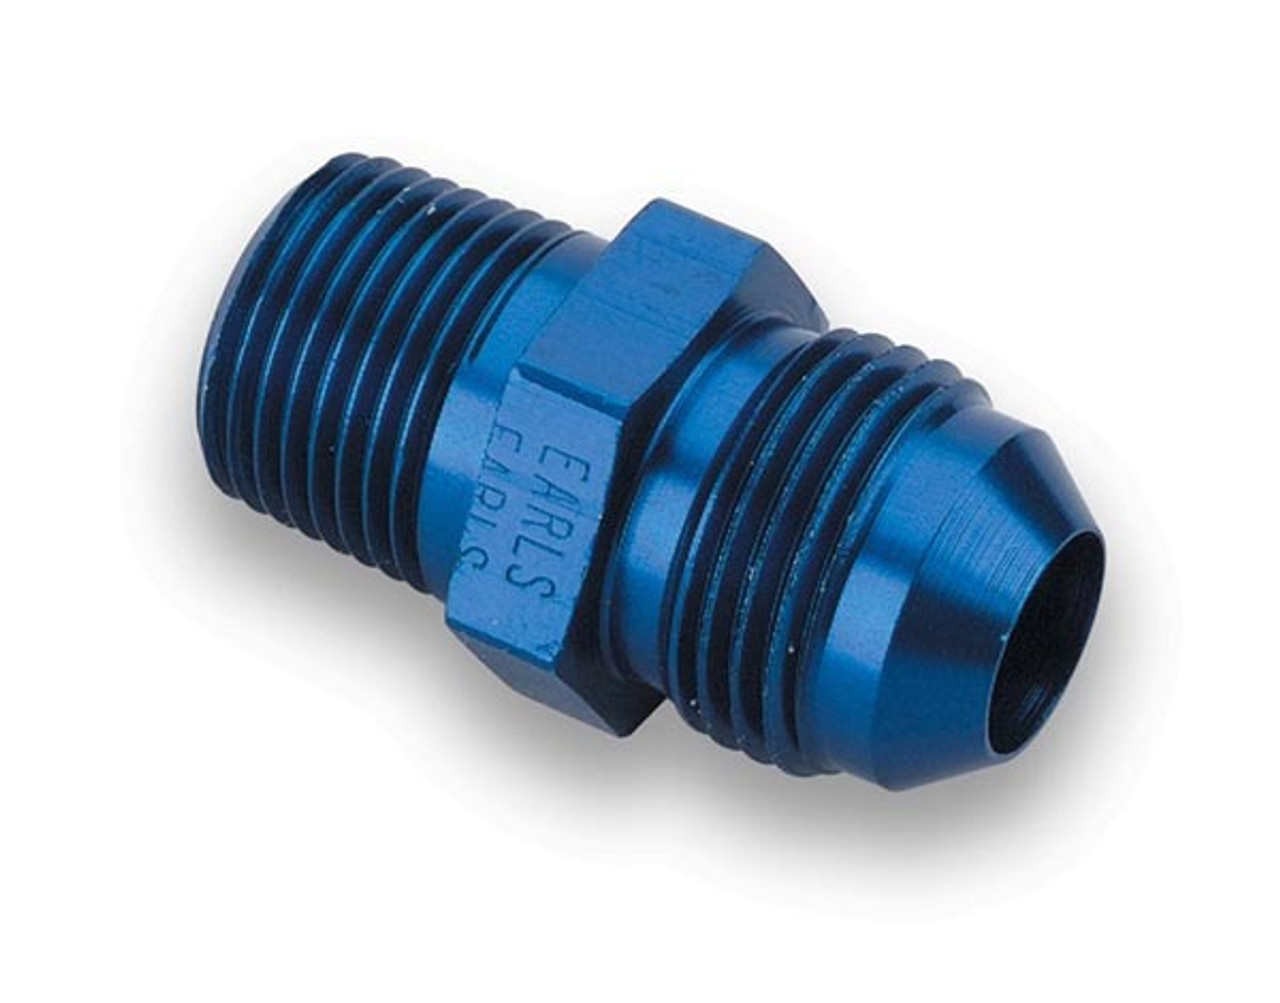 #8 Male to 12mm x 1.5 Adapter